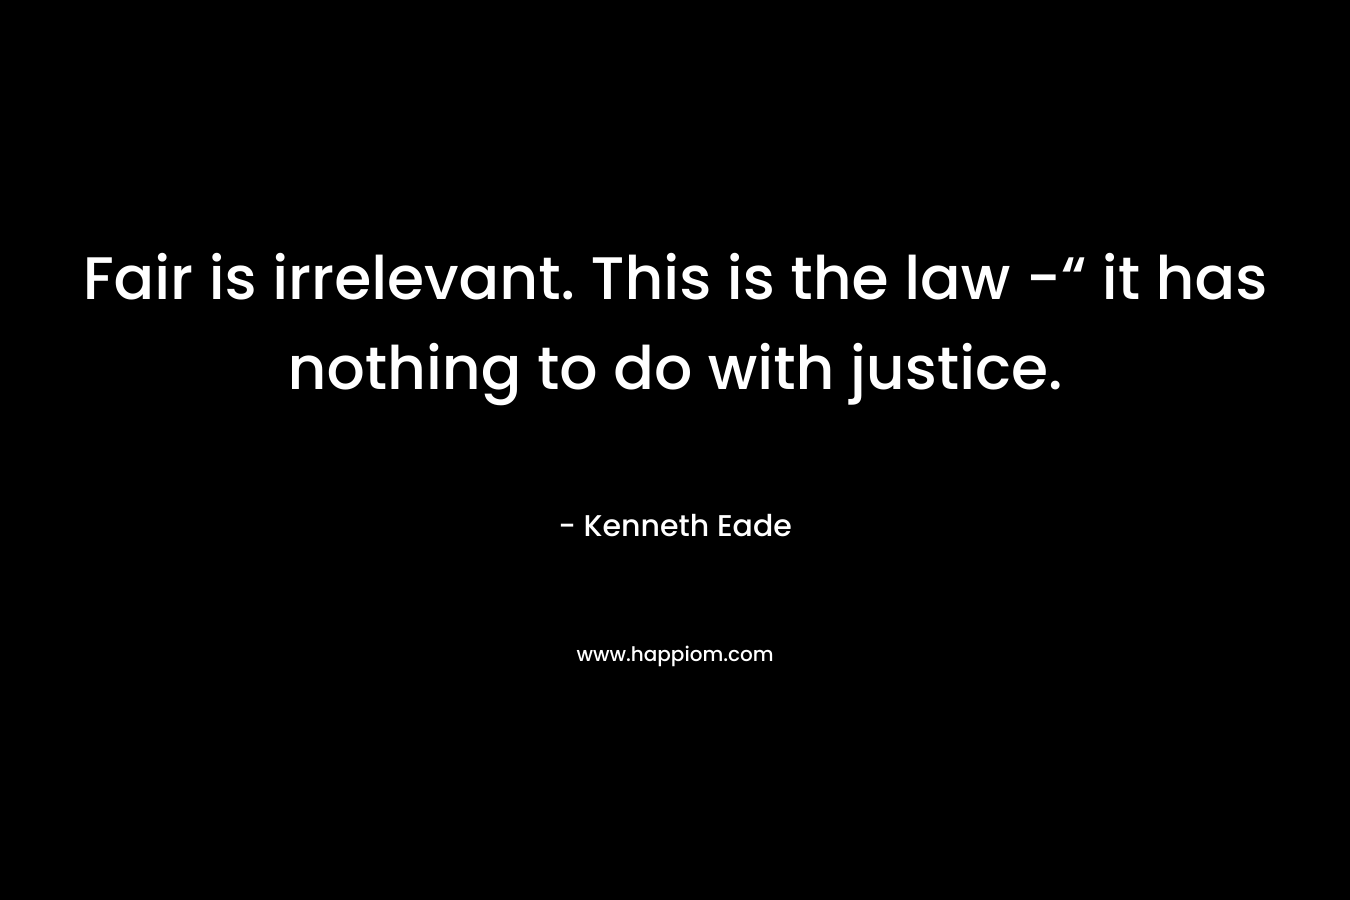 Fair is irrelevant. This is the law -“ it has nothing to do with justice.